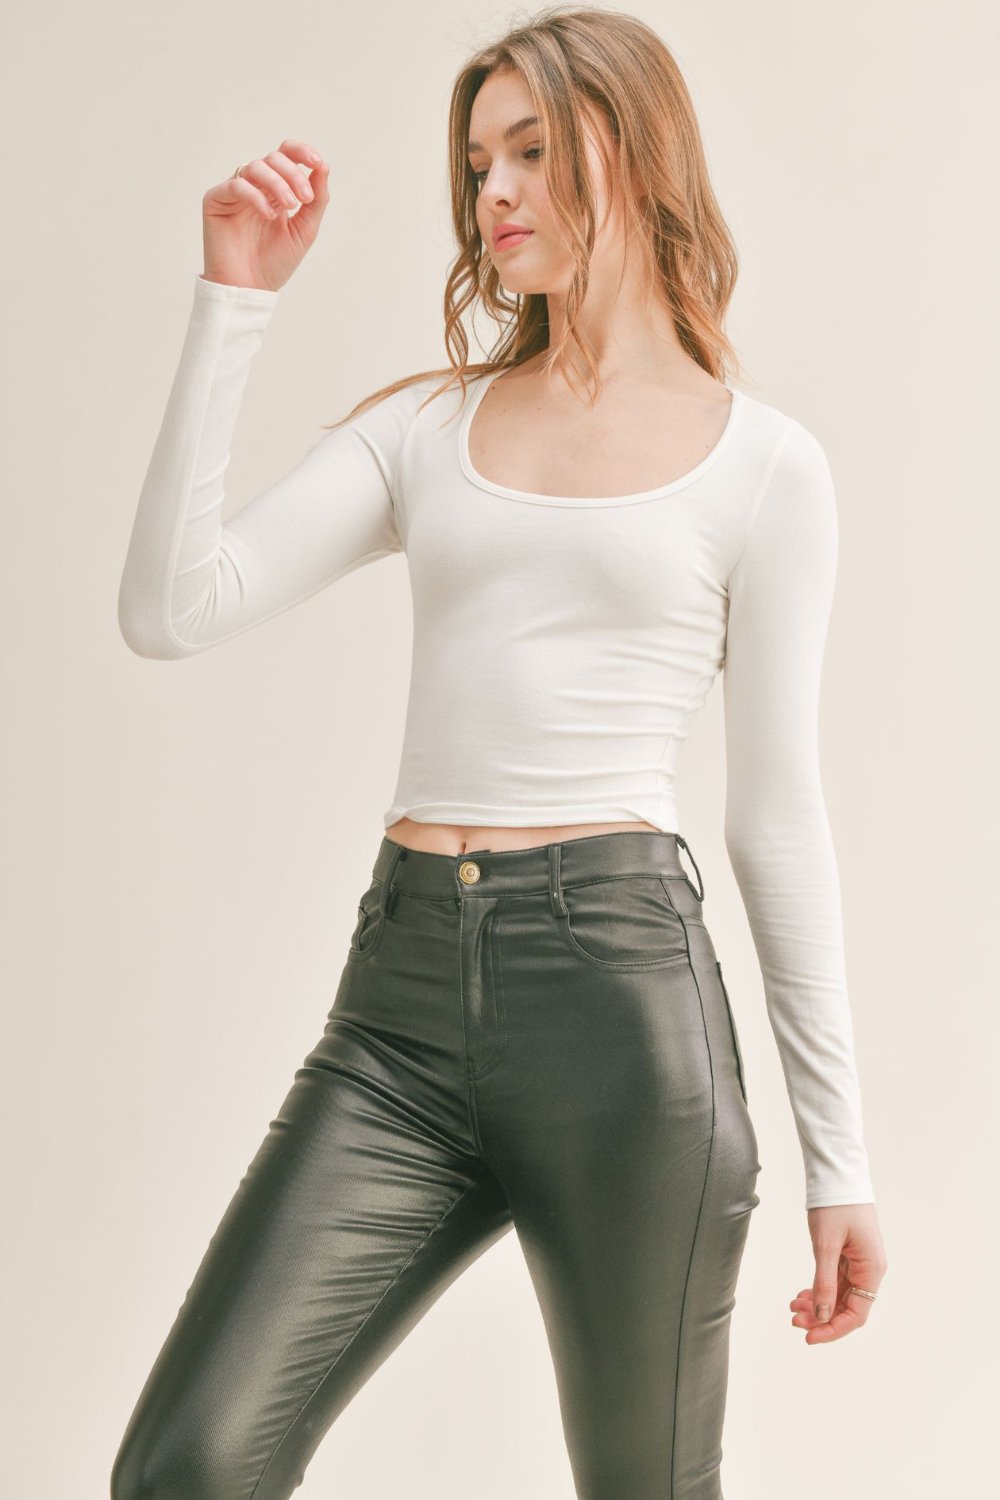 Women's Must Have Basic Scoop Neck Top | White - Women's Shirts & Tops - Blooming Daily